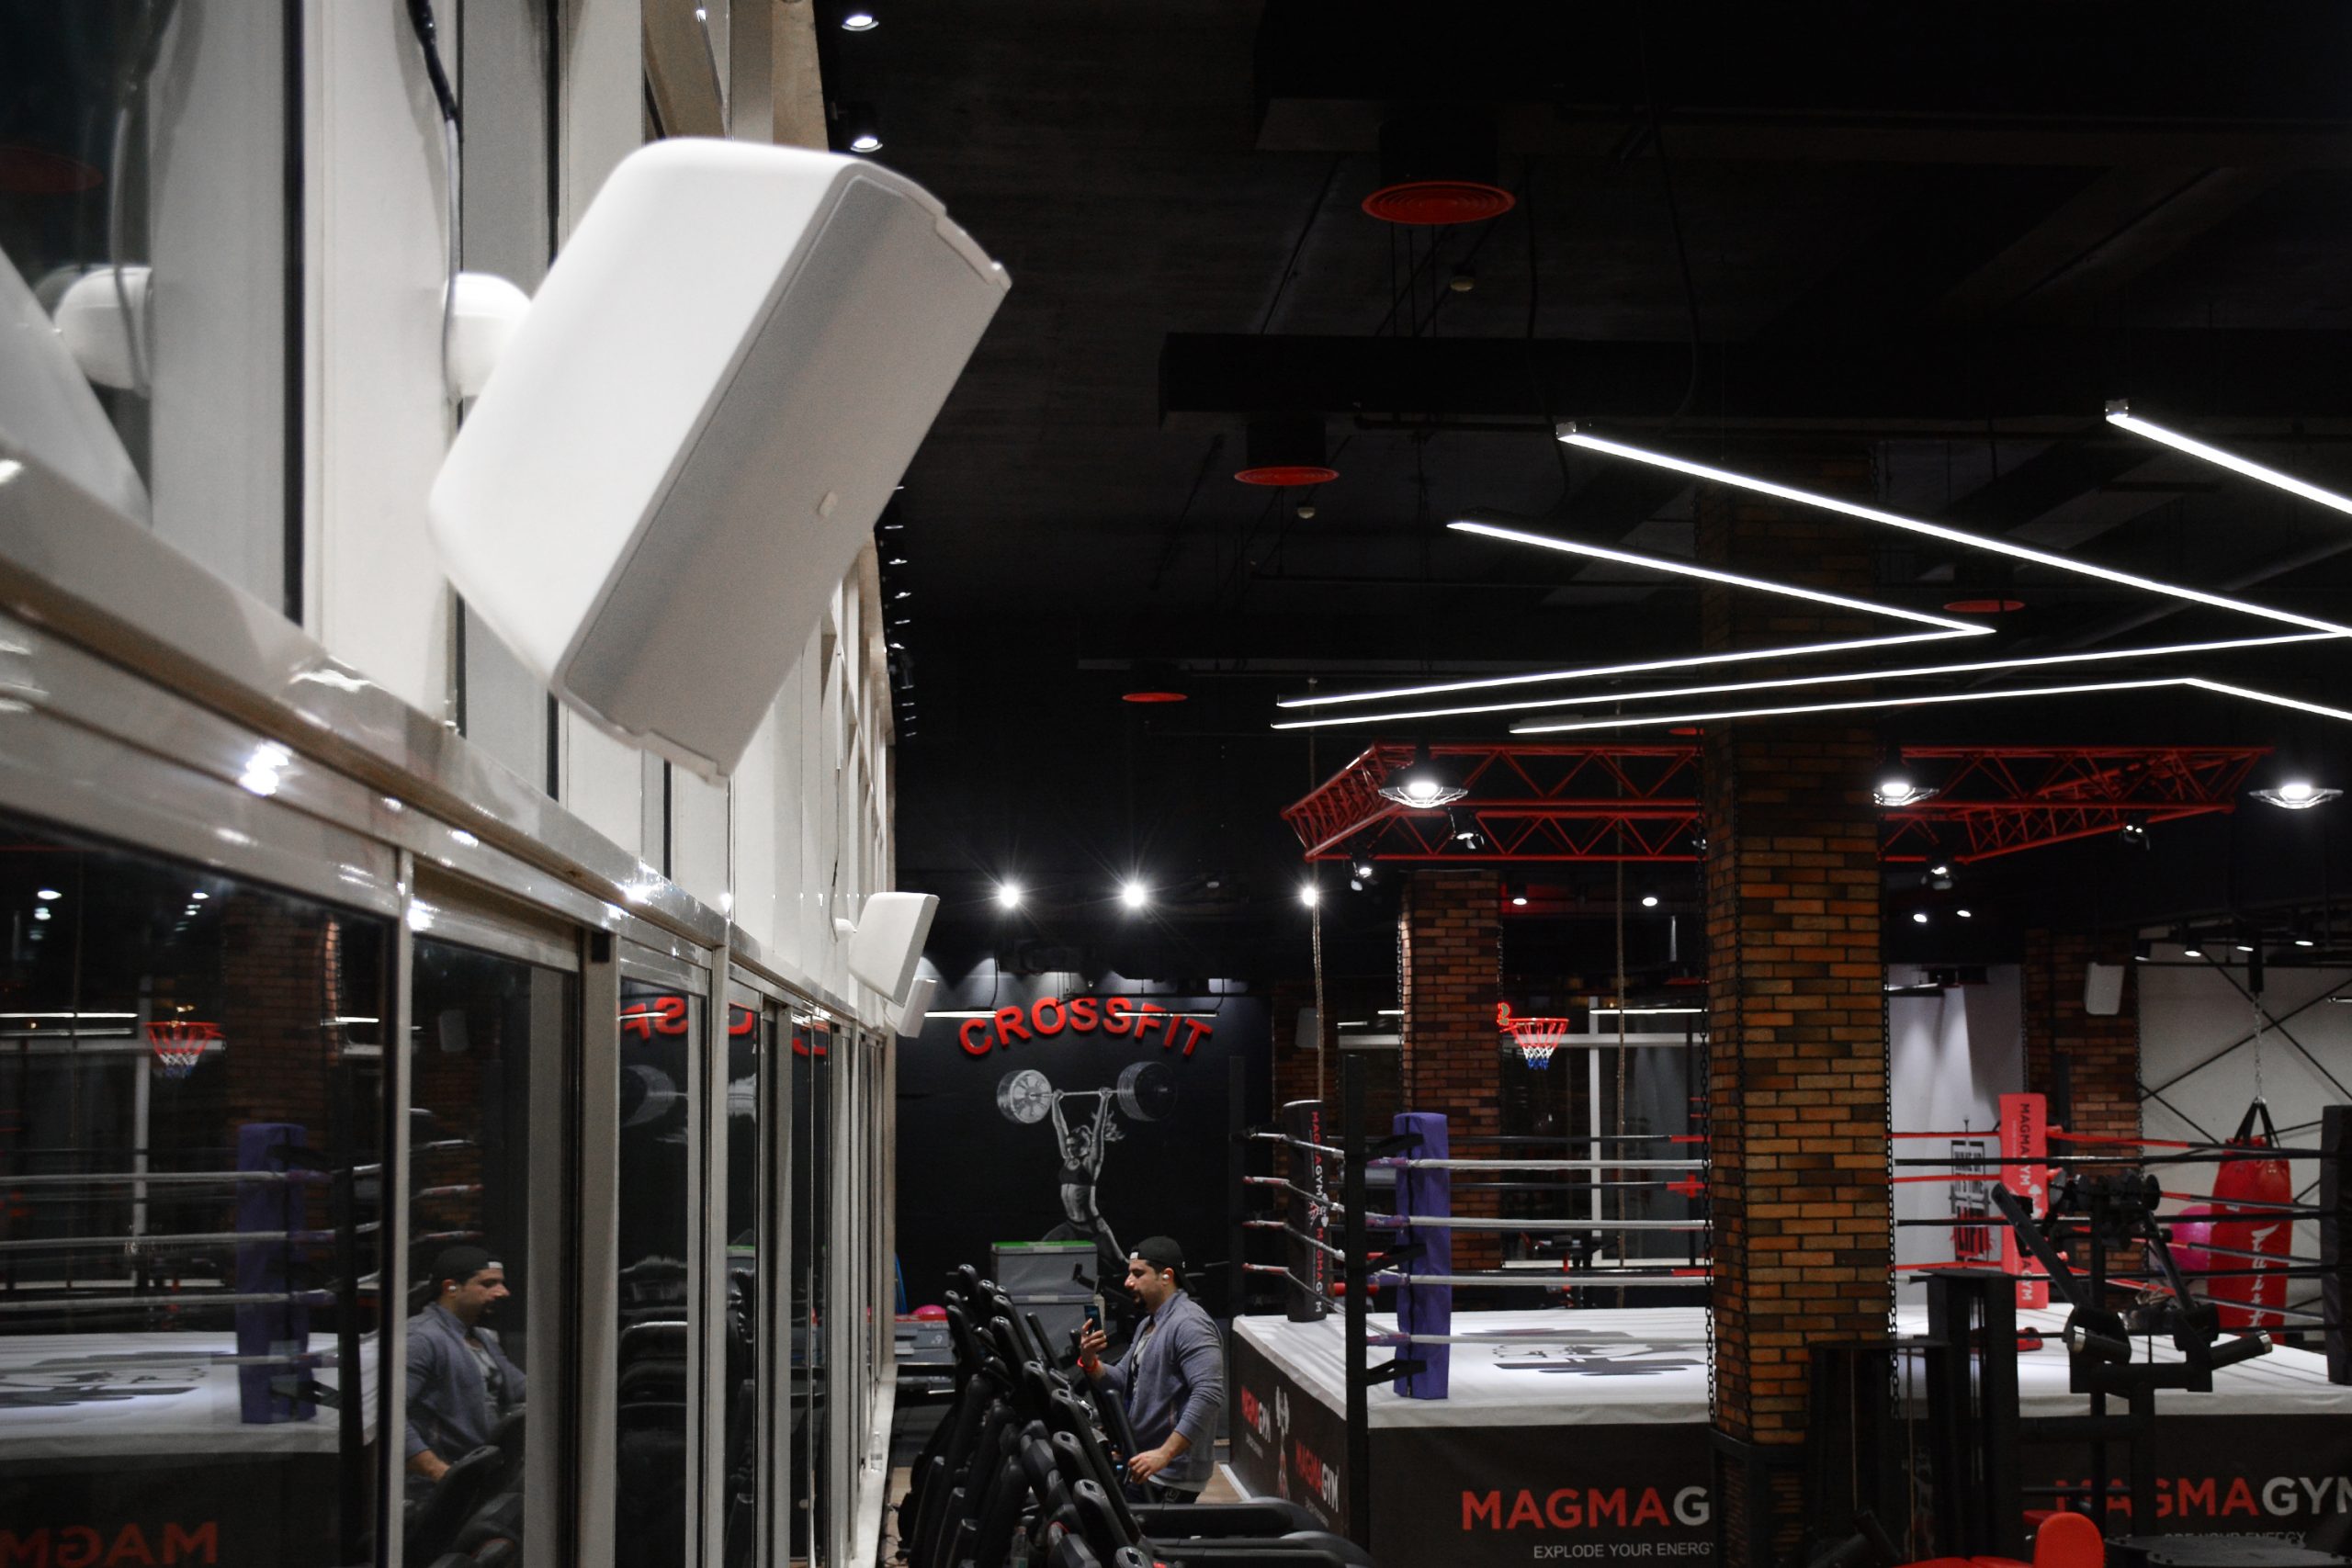 Ideal training partner – LD Systems DQOR provides sound reinforcement for Magma Square Gym in Iraq